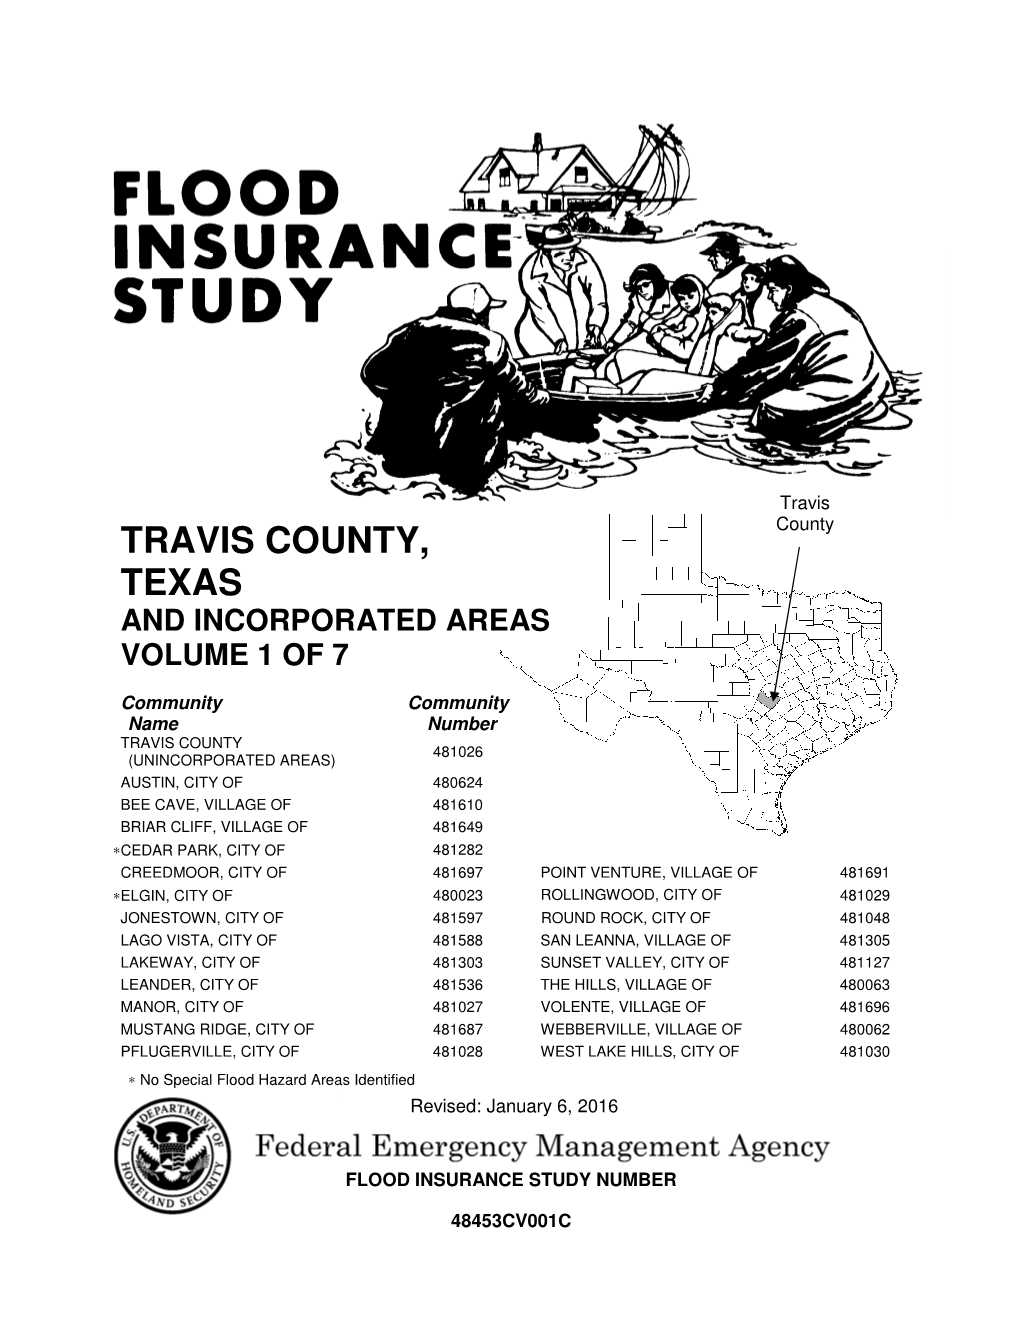 Travis County, Texas and Incorporated Areas